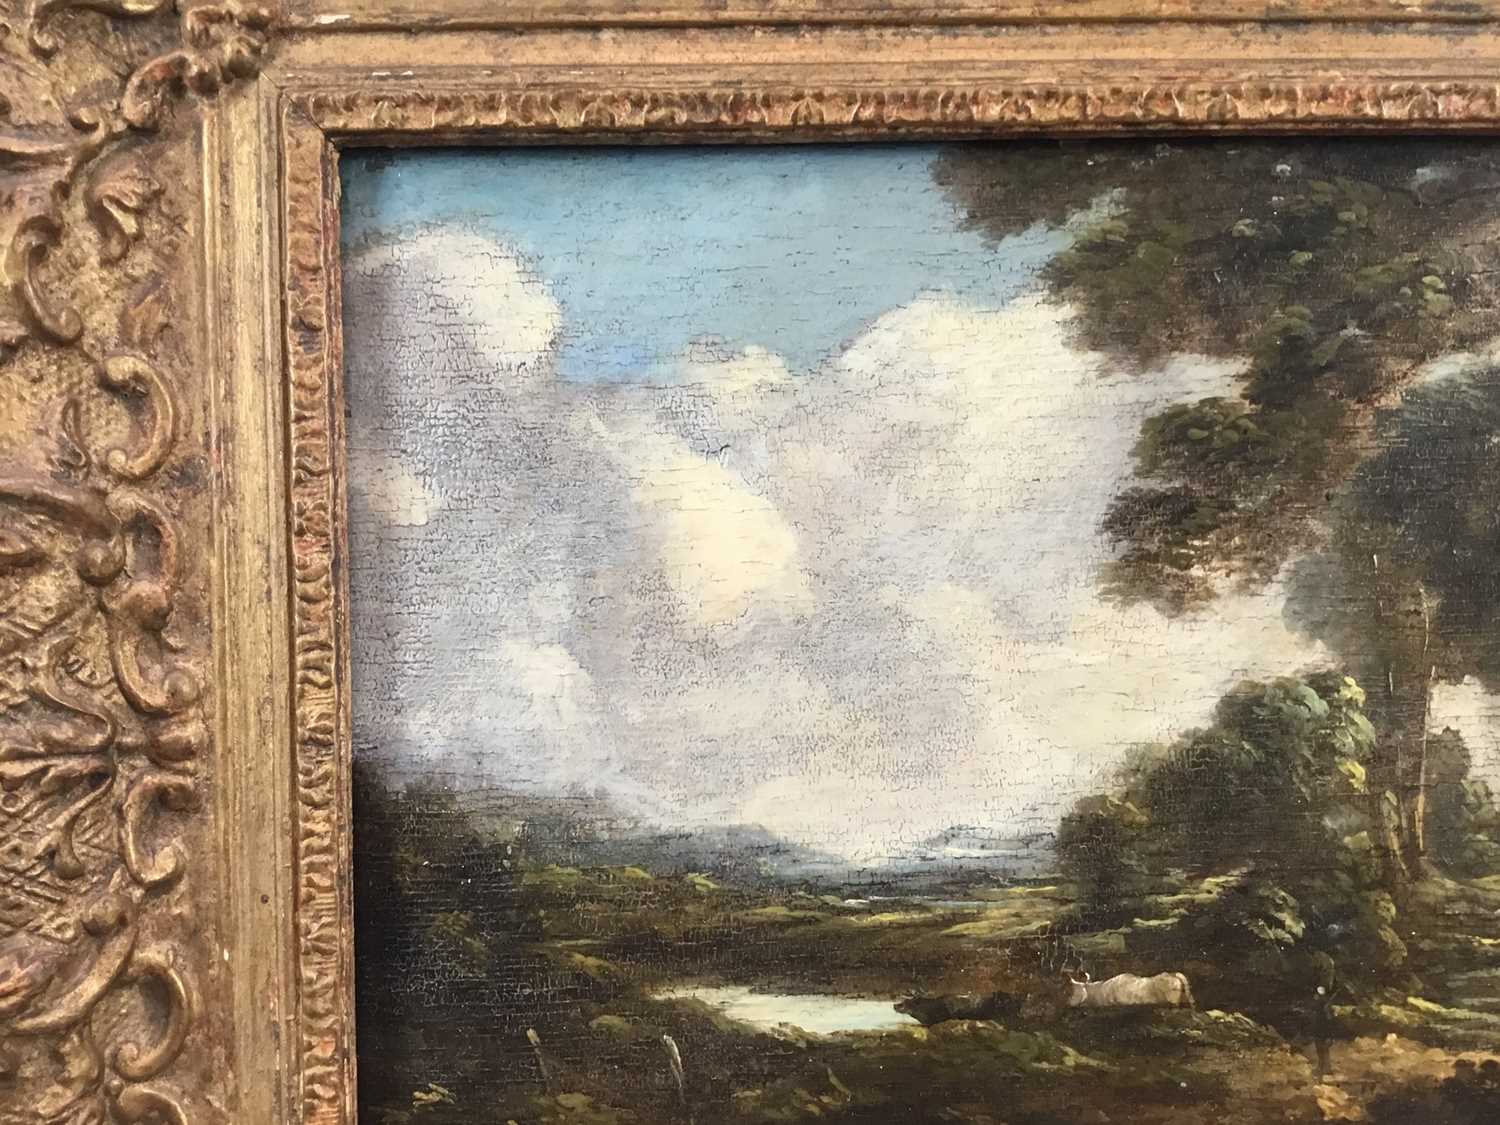 Manner of Thomas Gainsborough, oil on panel - cattle and figure in rural landscape, in gilt frame - Image 6 of 11